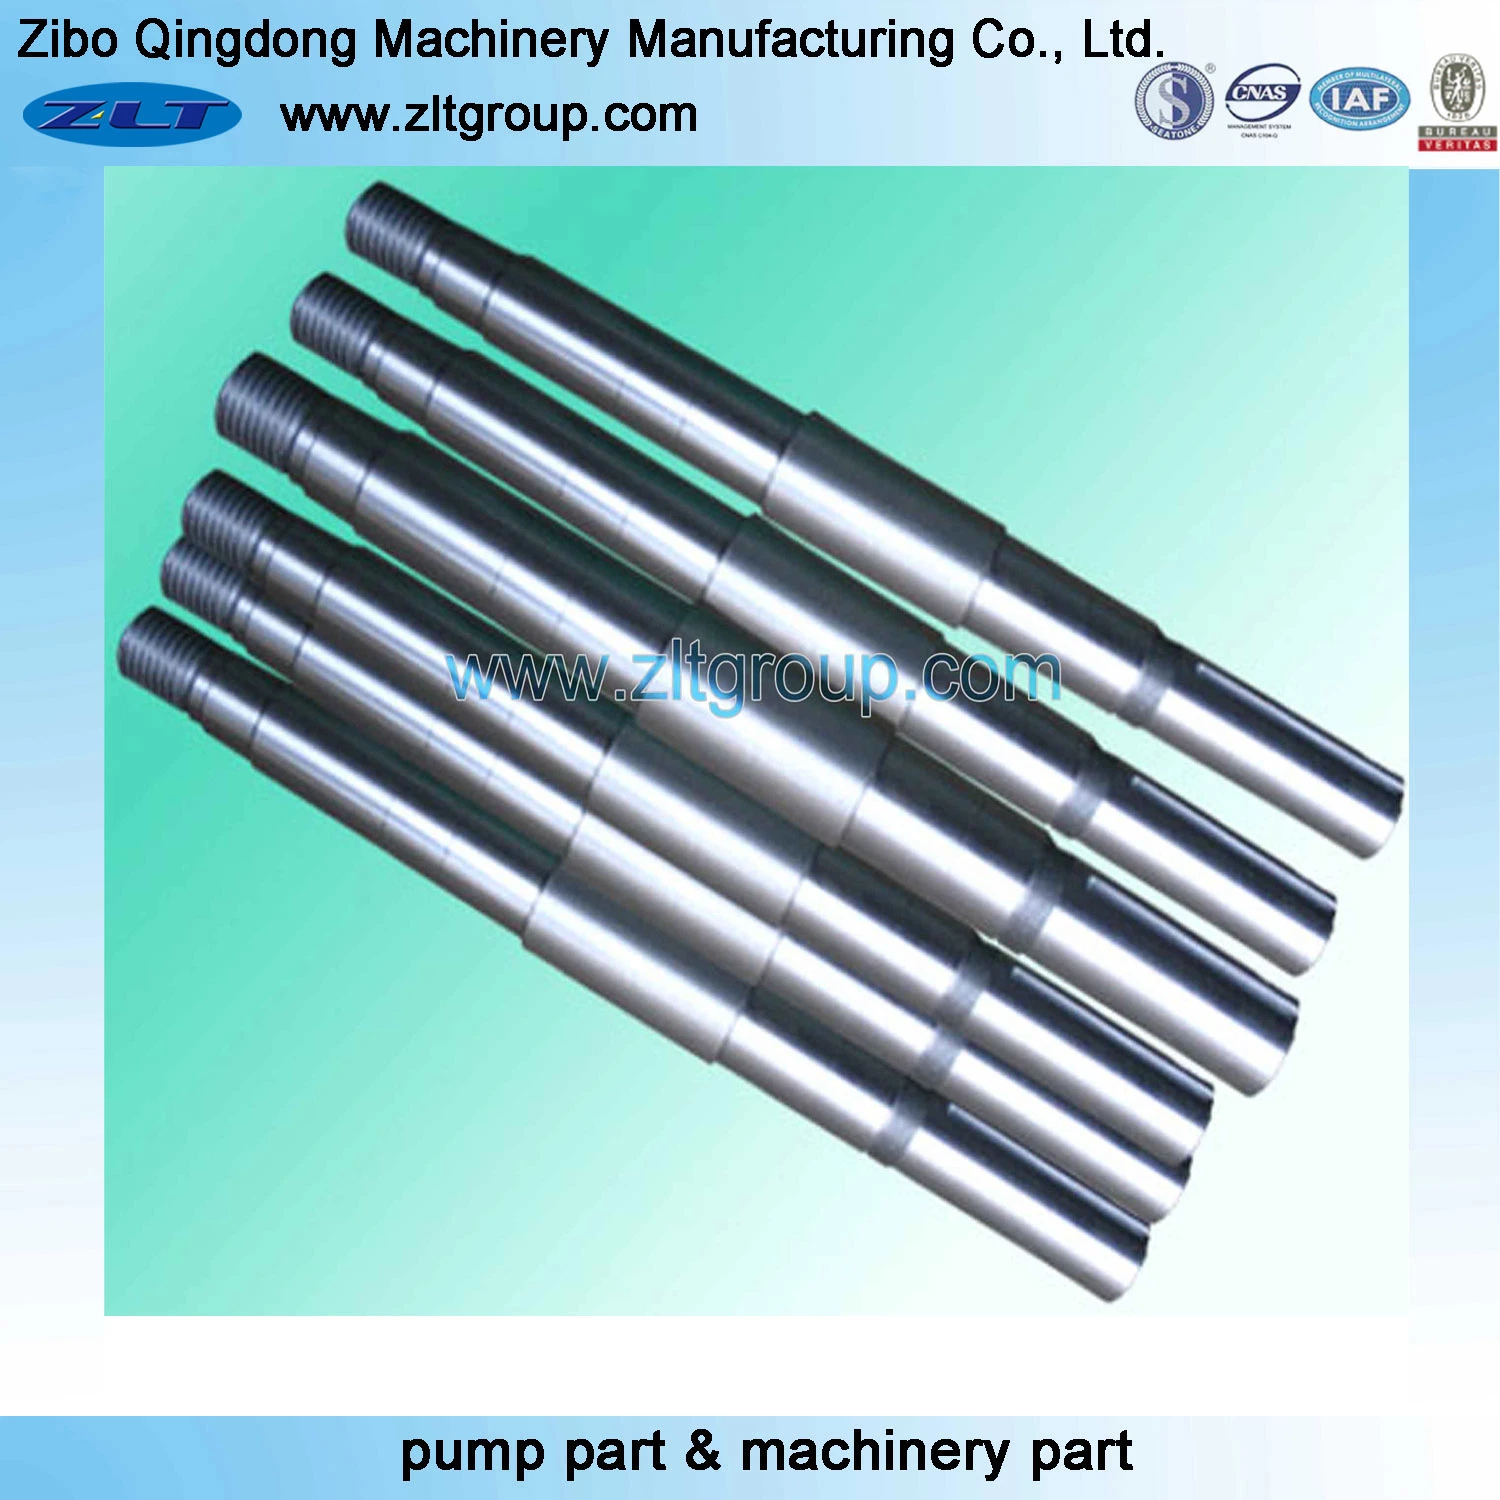 Customized OEM/ODM CNC Machining Shaft in Stainless Steel 316/CD4/304 Used in Machinery Industry